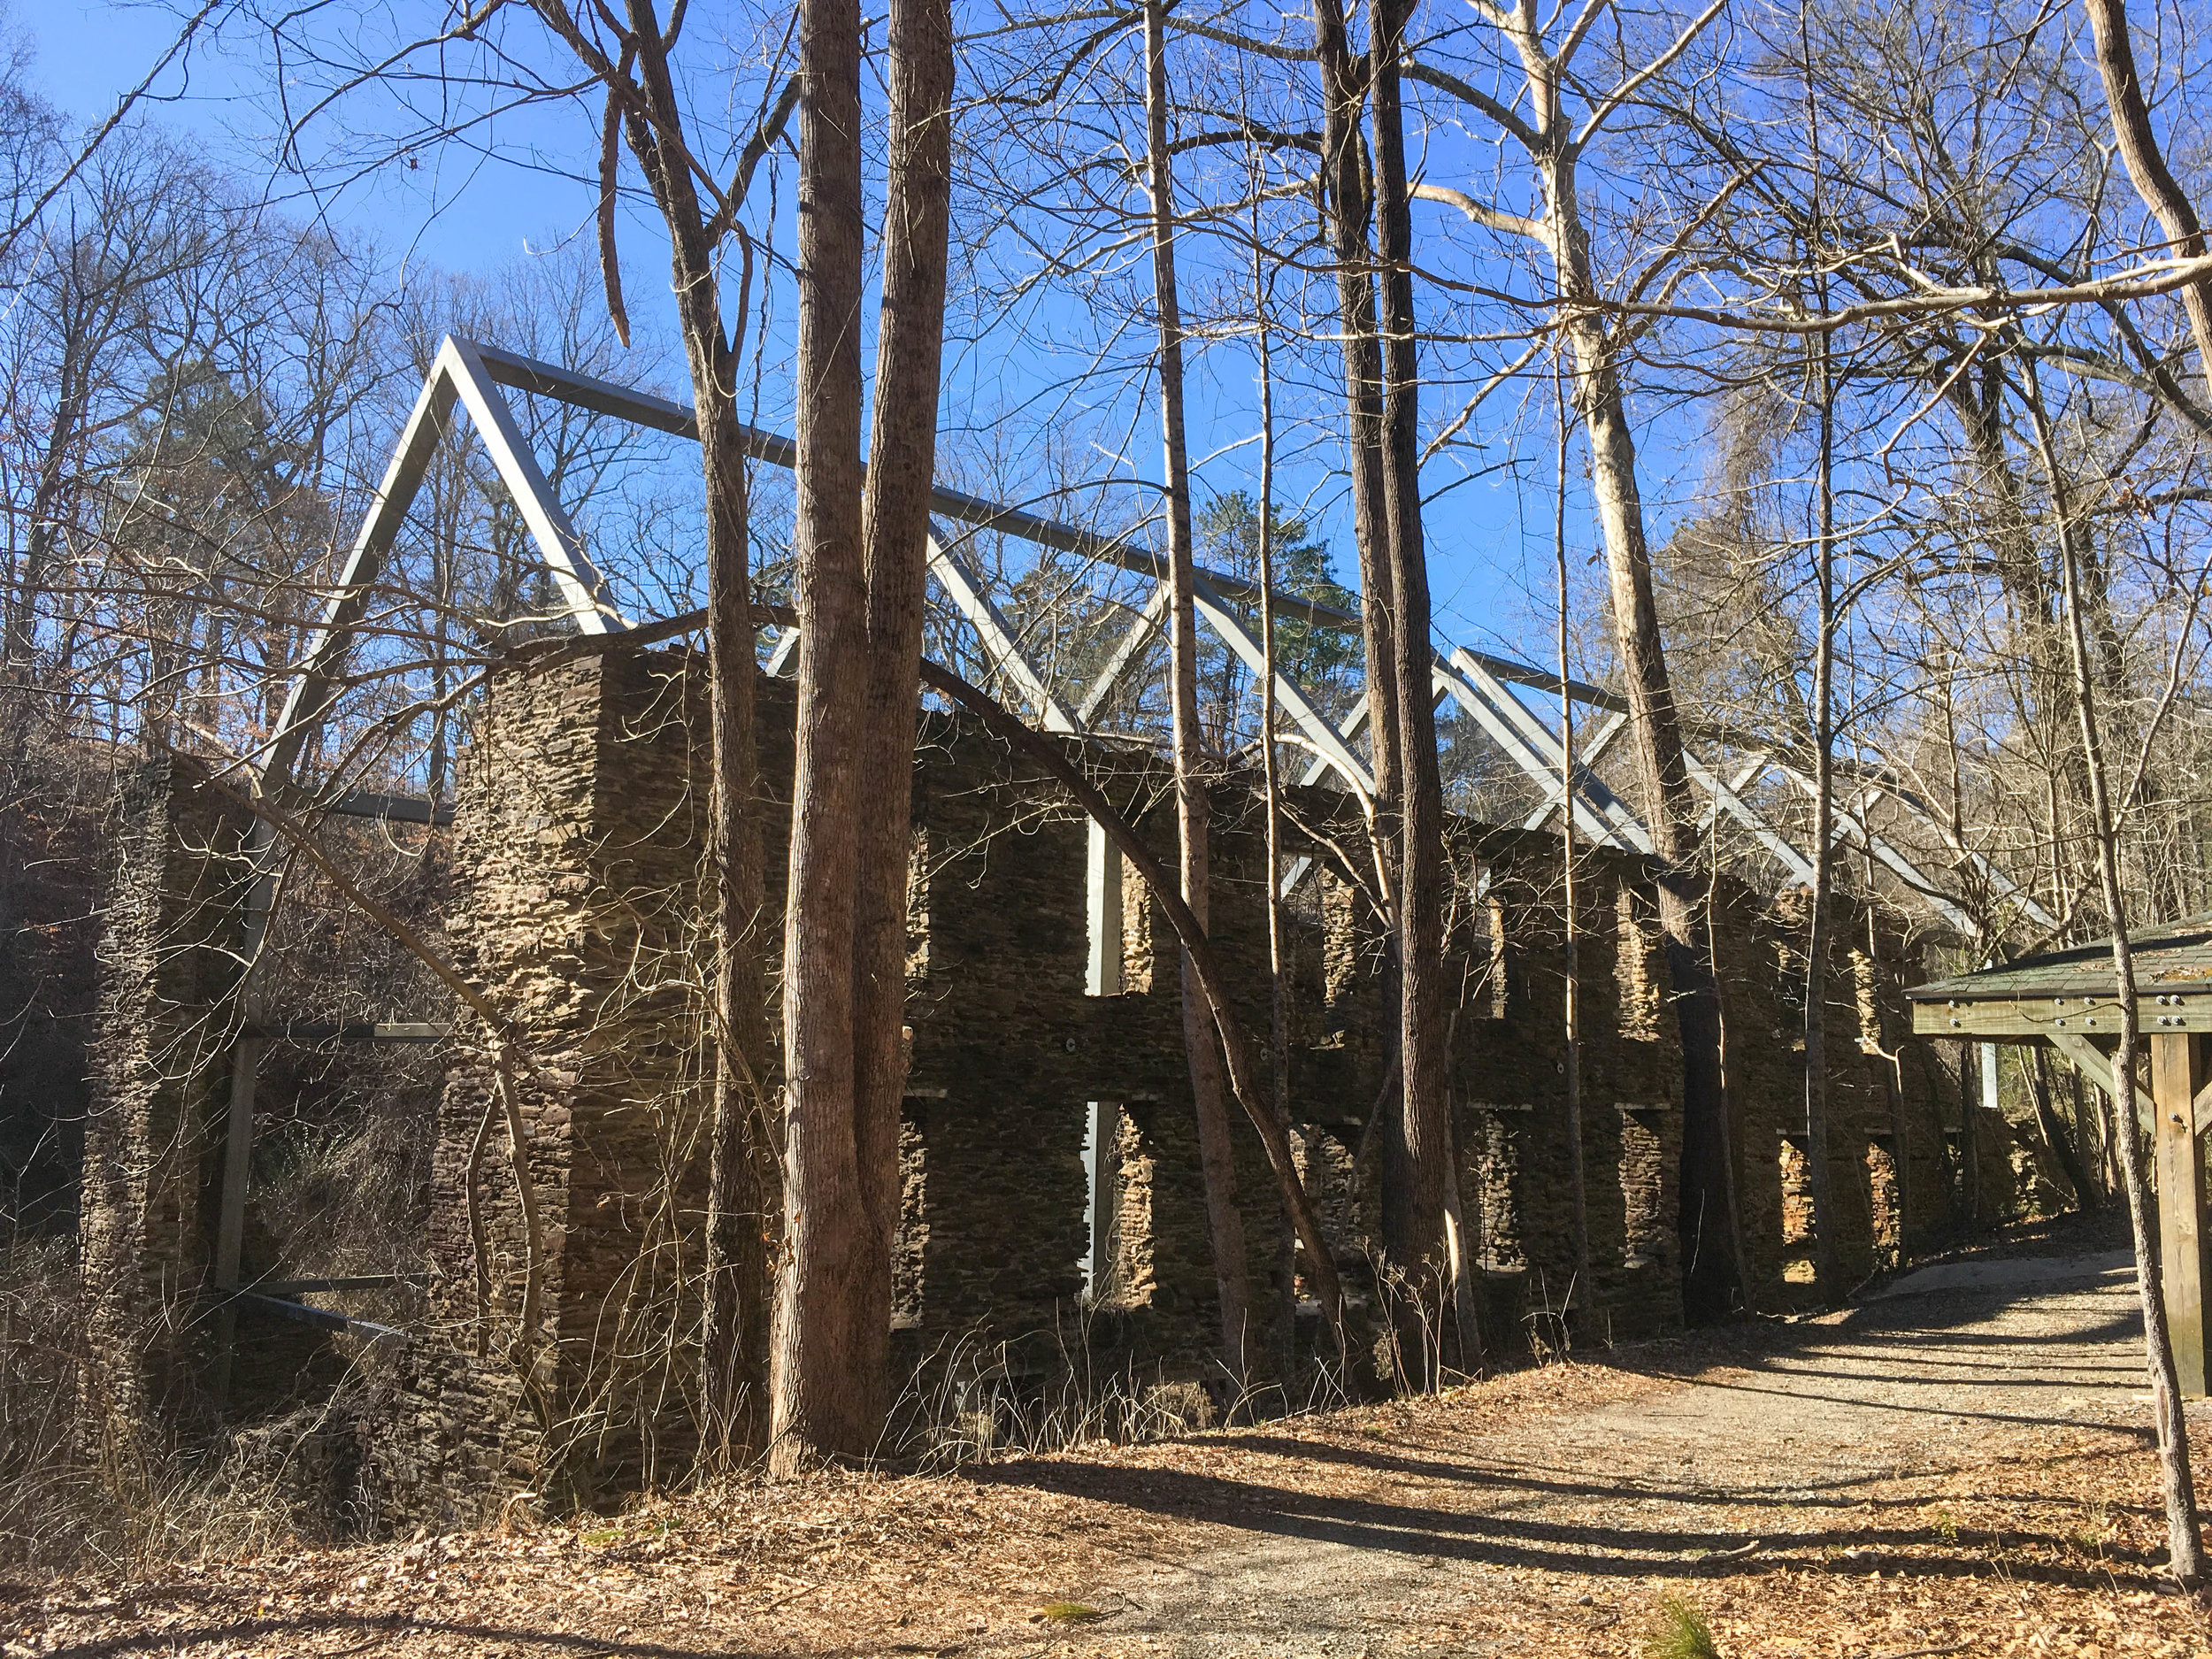 Concord Woolen Mill Ruins, January 21, 2019